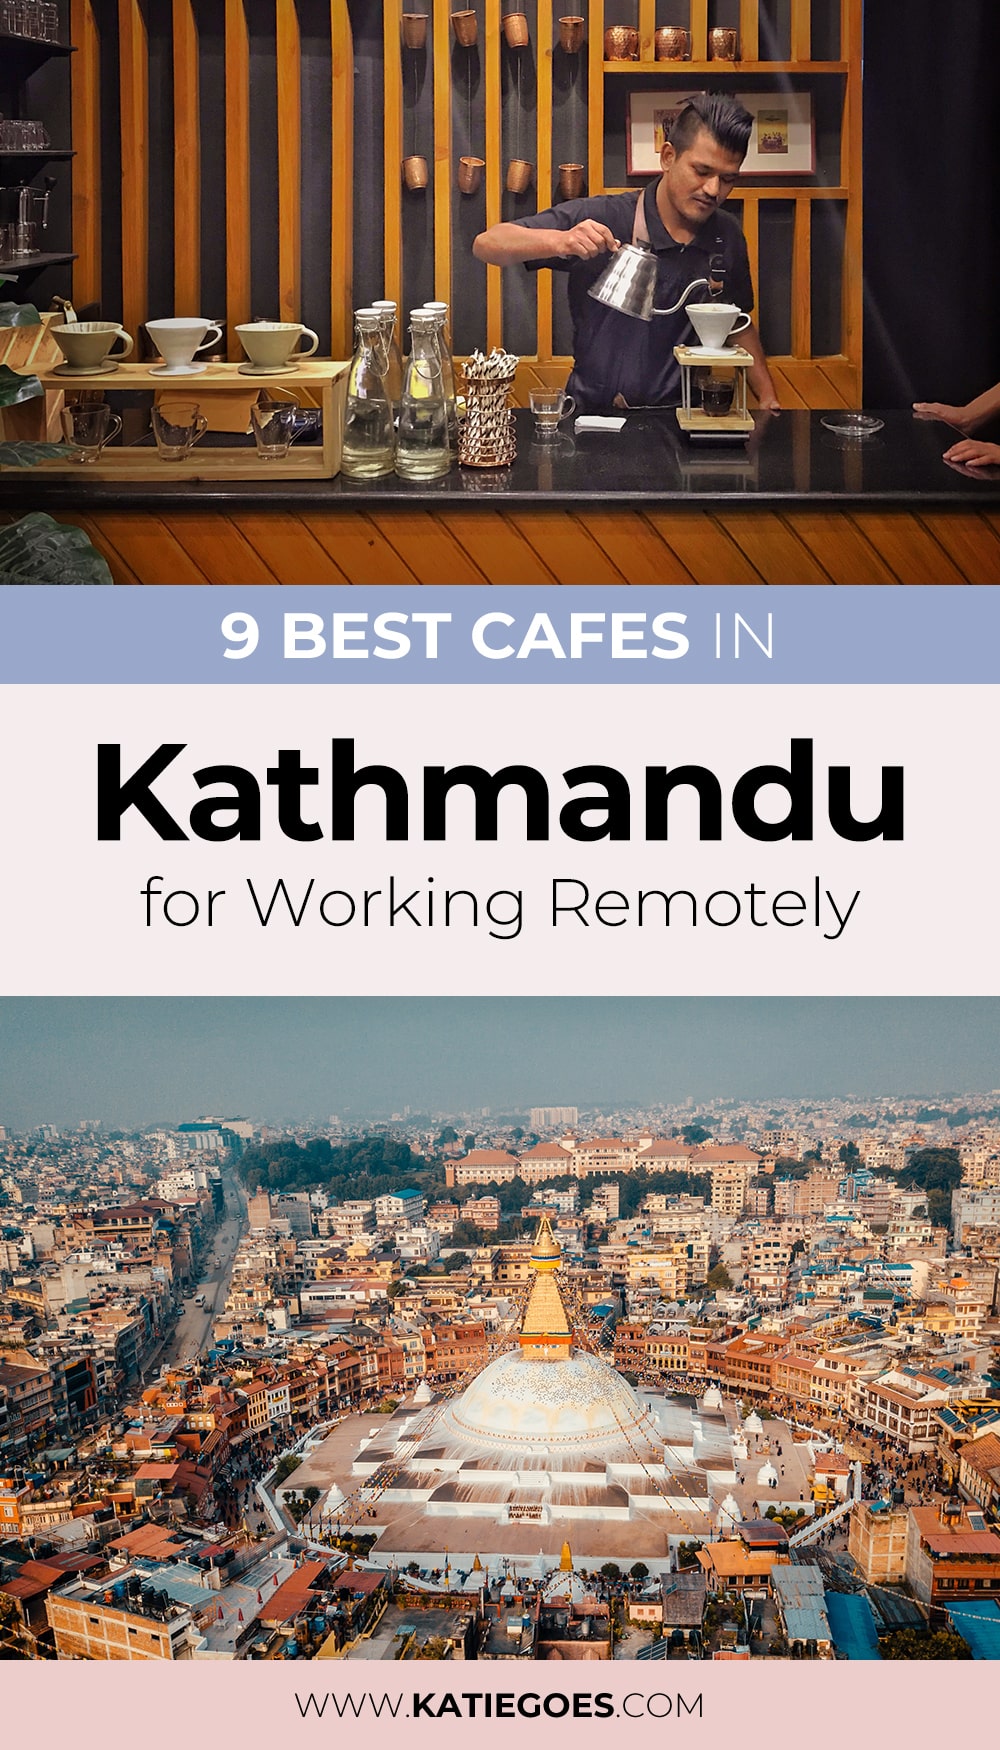 9 Best Cafes to Work in Kathmandu for Working Remotely